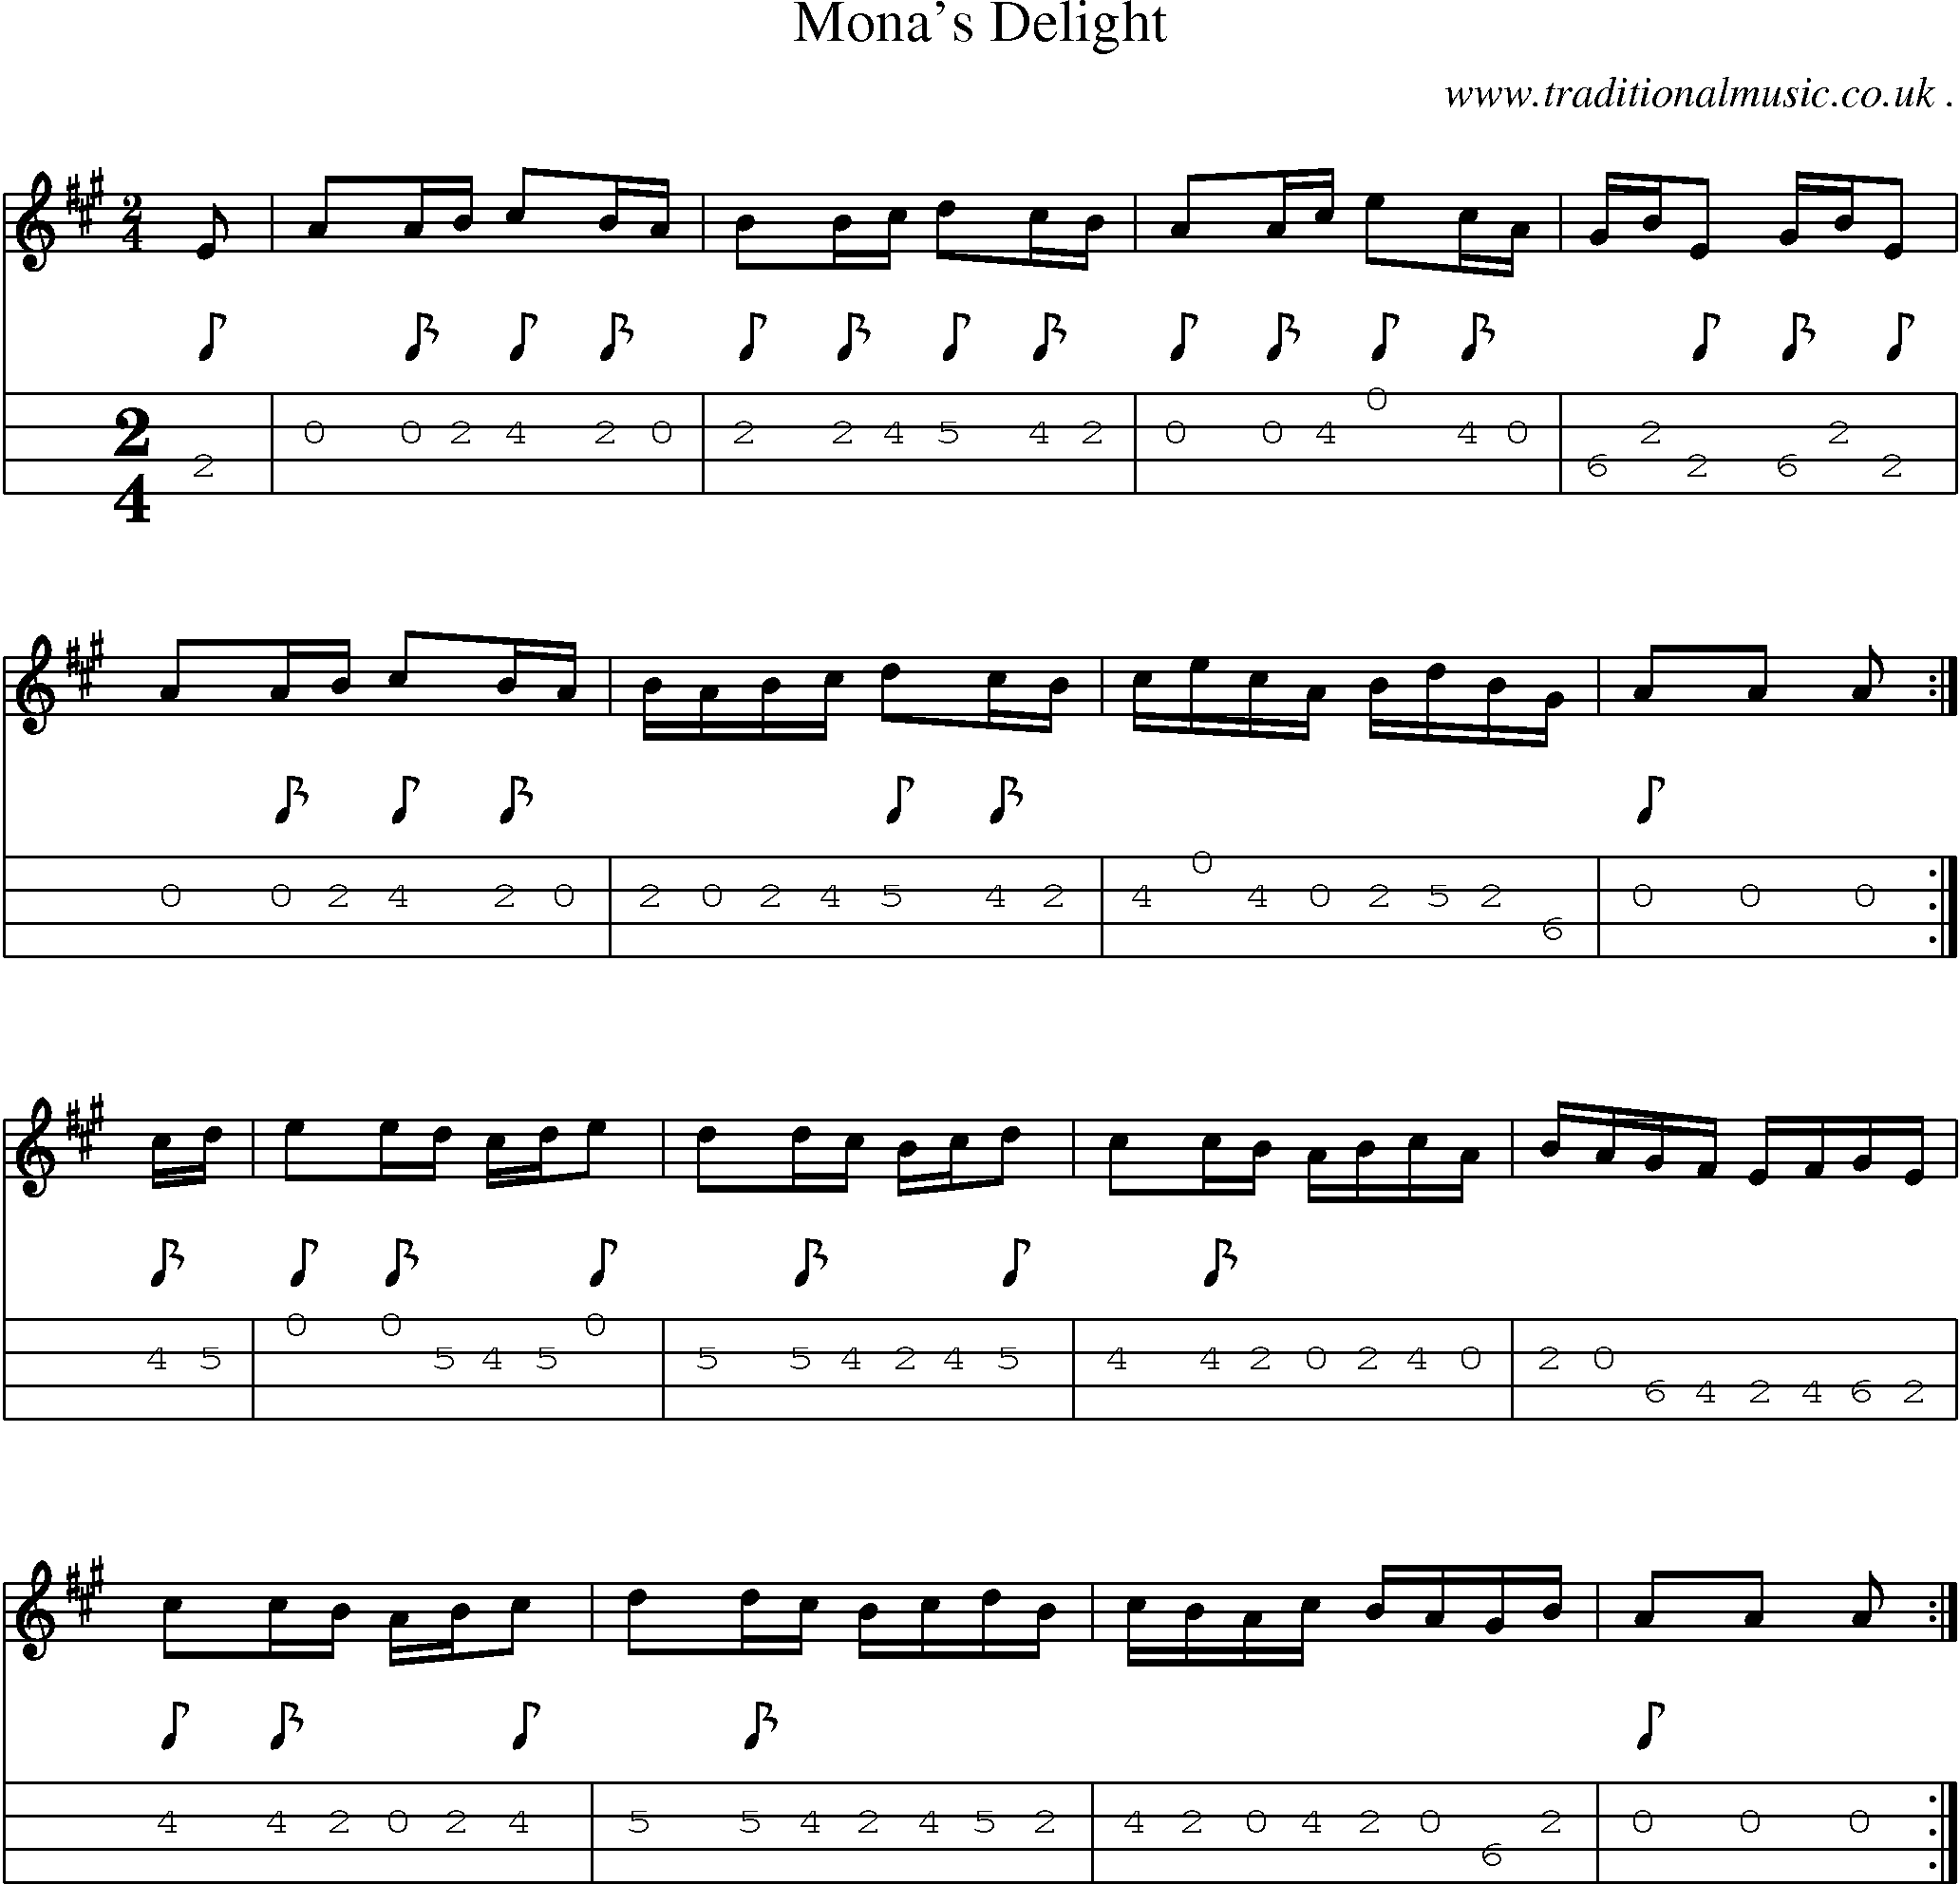 Sheet-music  score, Chords and Mandolin Tabs for Monas Delight